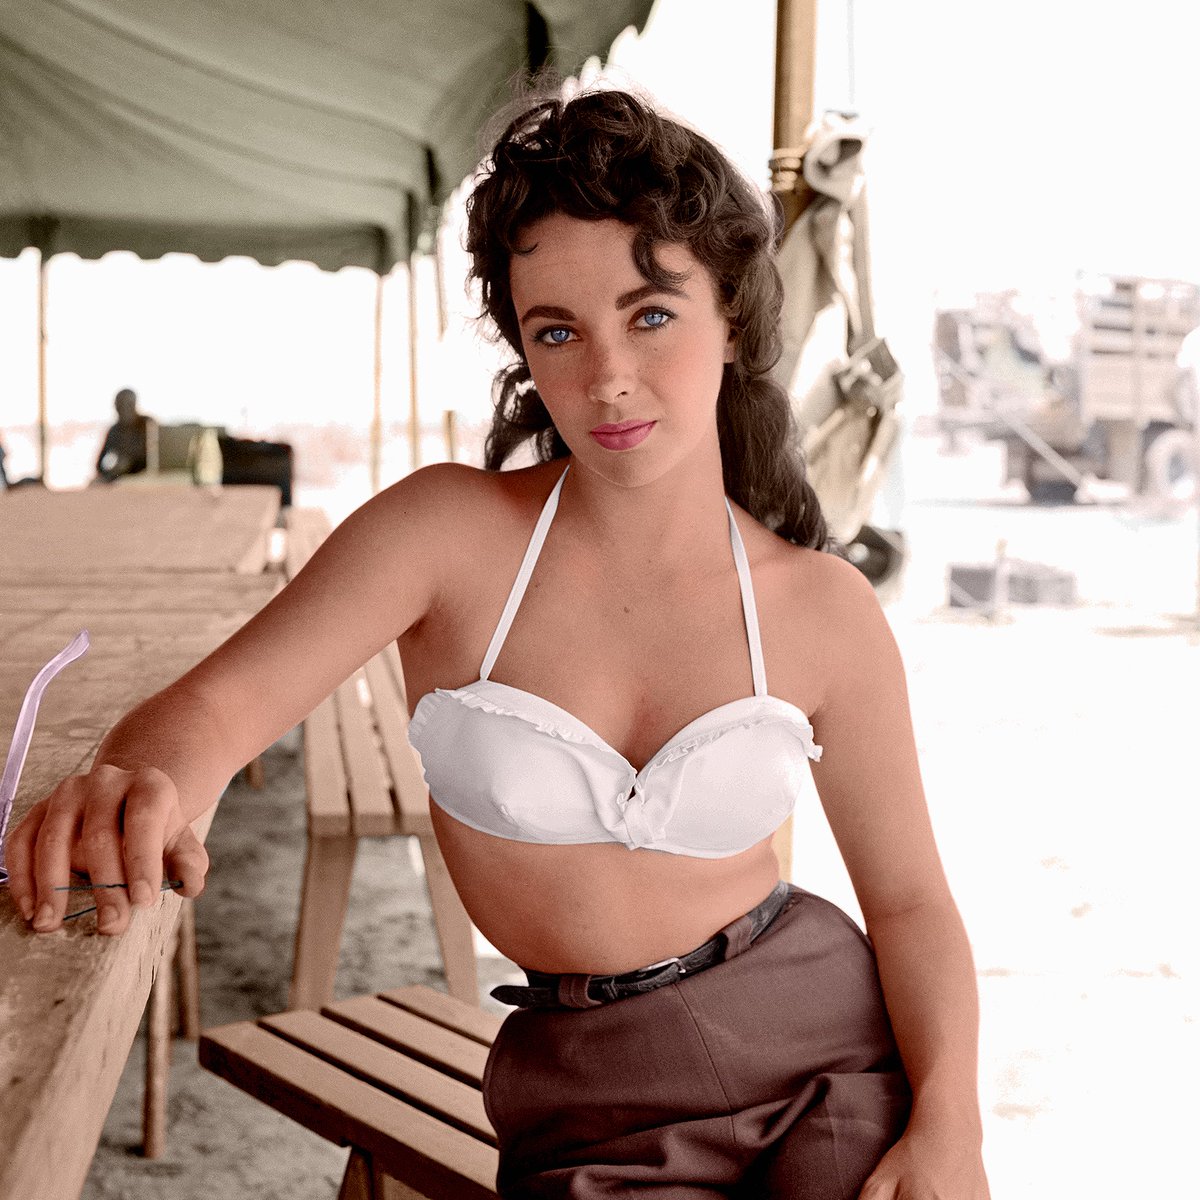 Elizabeth Taylor: The Lost Tapes will have its world premiere at Cannes Film Festival this month! Directed by Nanette Burstein, the documentary uses audio interviews with Elizabeth to examine the icon’s life in her own words. The film debuts 8/3 on @HBO and can be streamed on Max